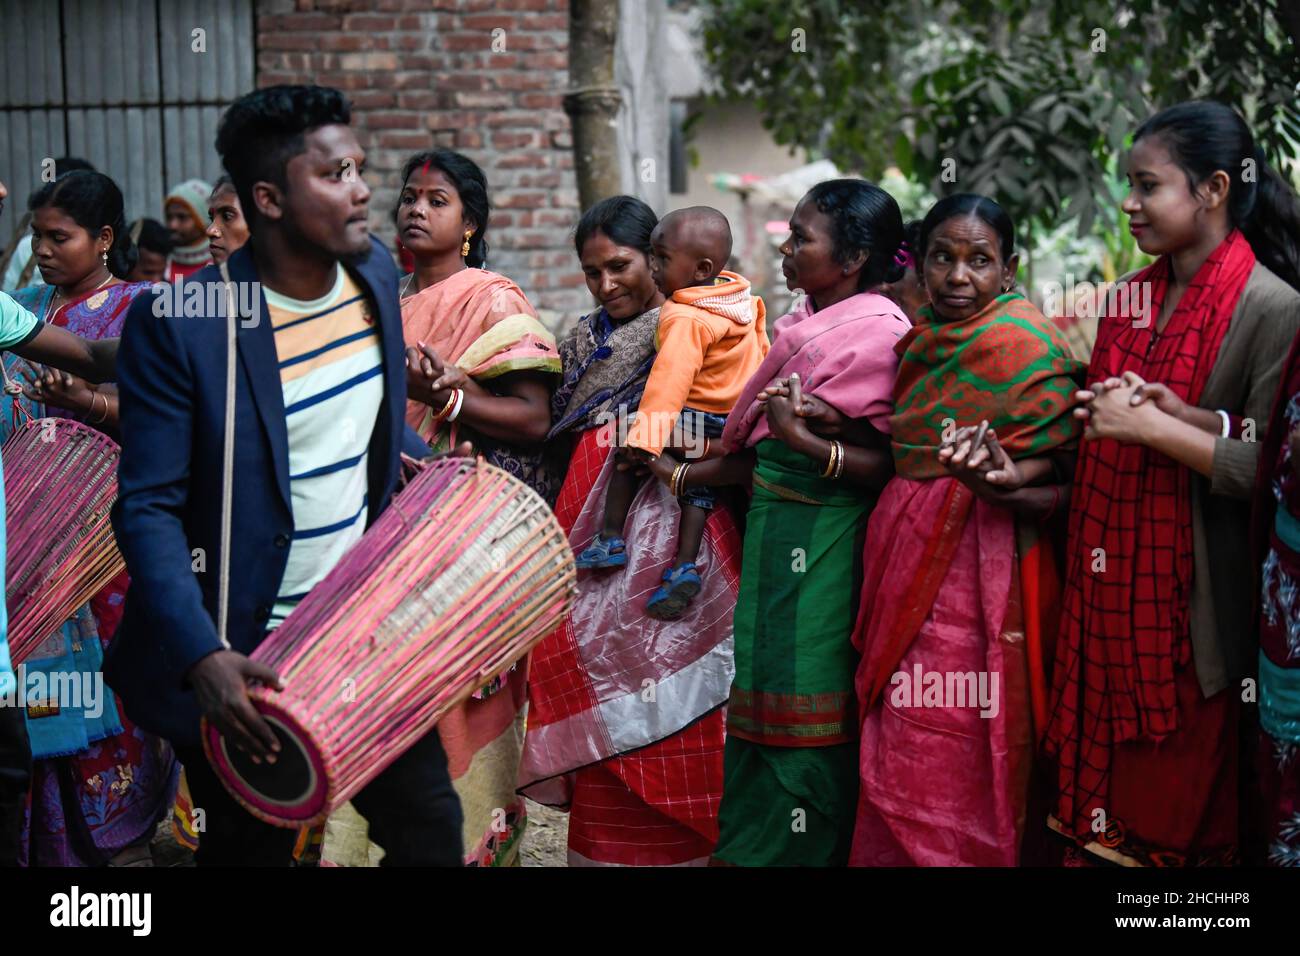 Rajshahi, Bangladesh. 28th Dec, 2021. Santali people seen performing the traditional group dance at a wedding in Rajshahi. Santal tribe is an ethnic group native to eastern India. Santals are the largest tribe in the Jharkhand state of India in terms of population and are also found in the states of Assam, Tripura, Bihar, Odisha and West Bengal. They are the largest ethnic minority in northern Bangladesh's Rajshahi Division and Rangpur Division. Credit: SOPA Images Limited/Alamy Live News Stock Photo